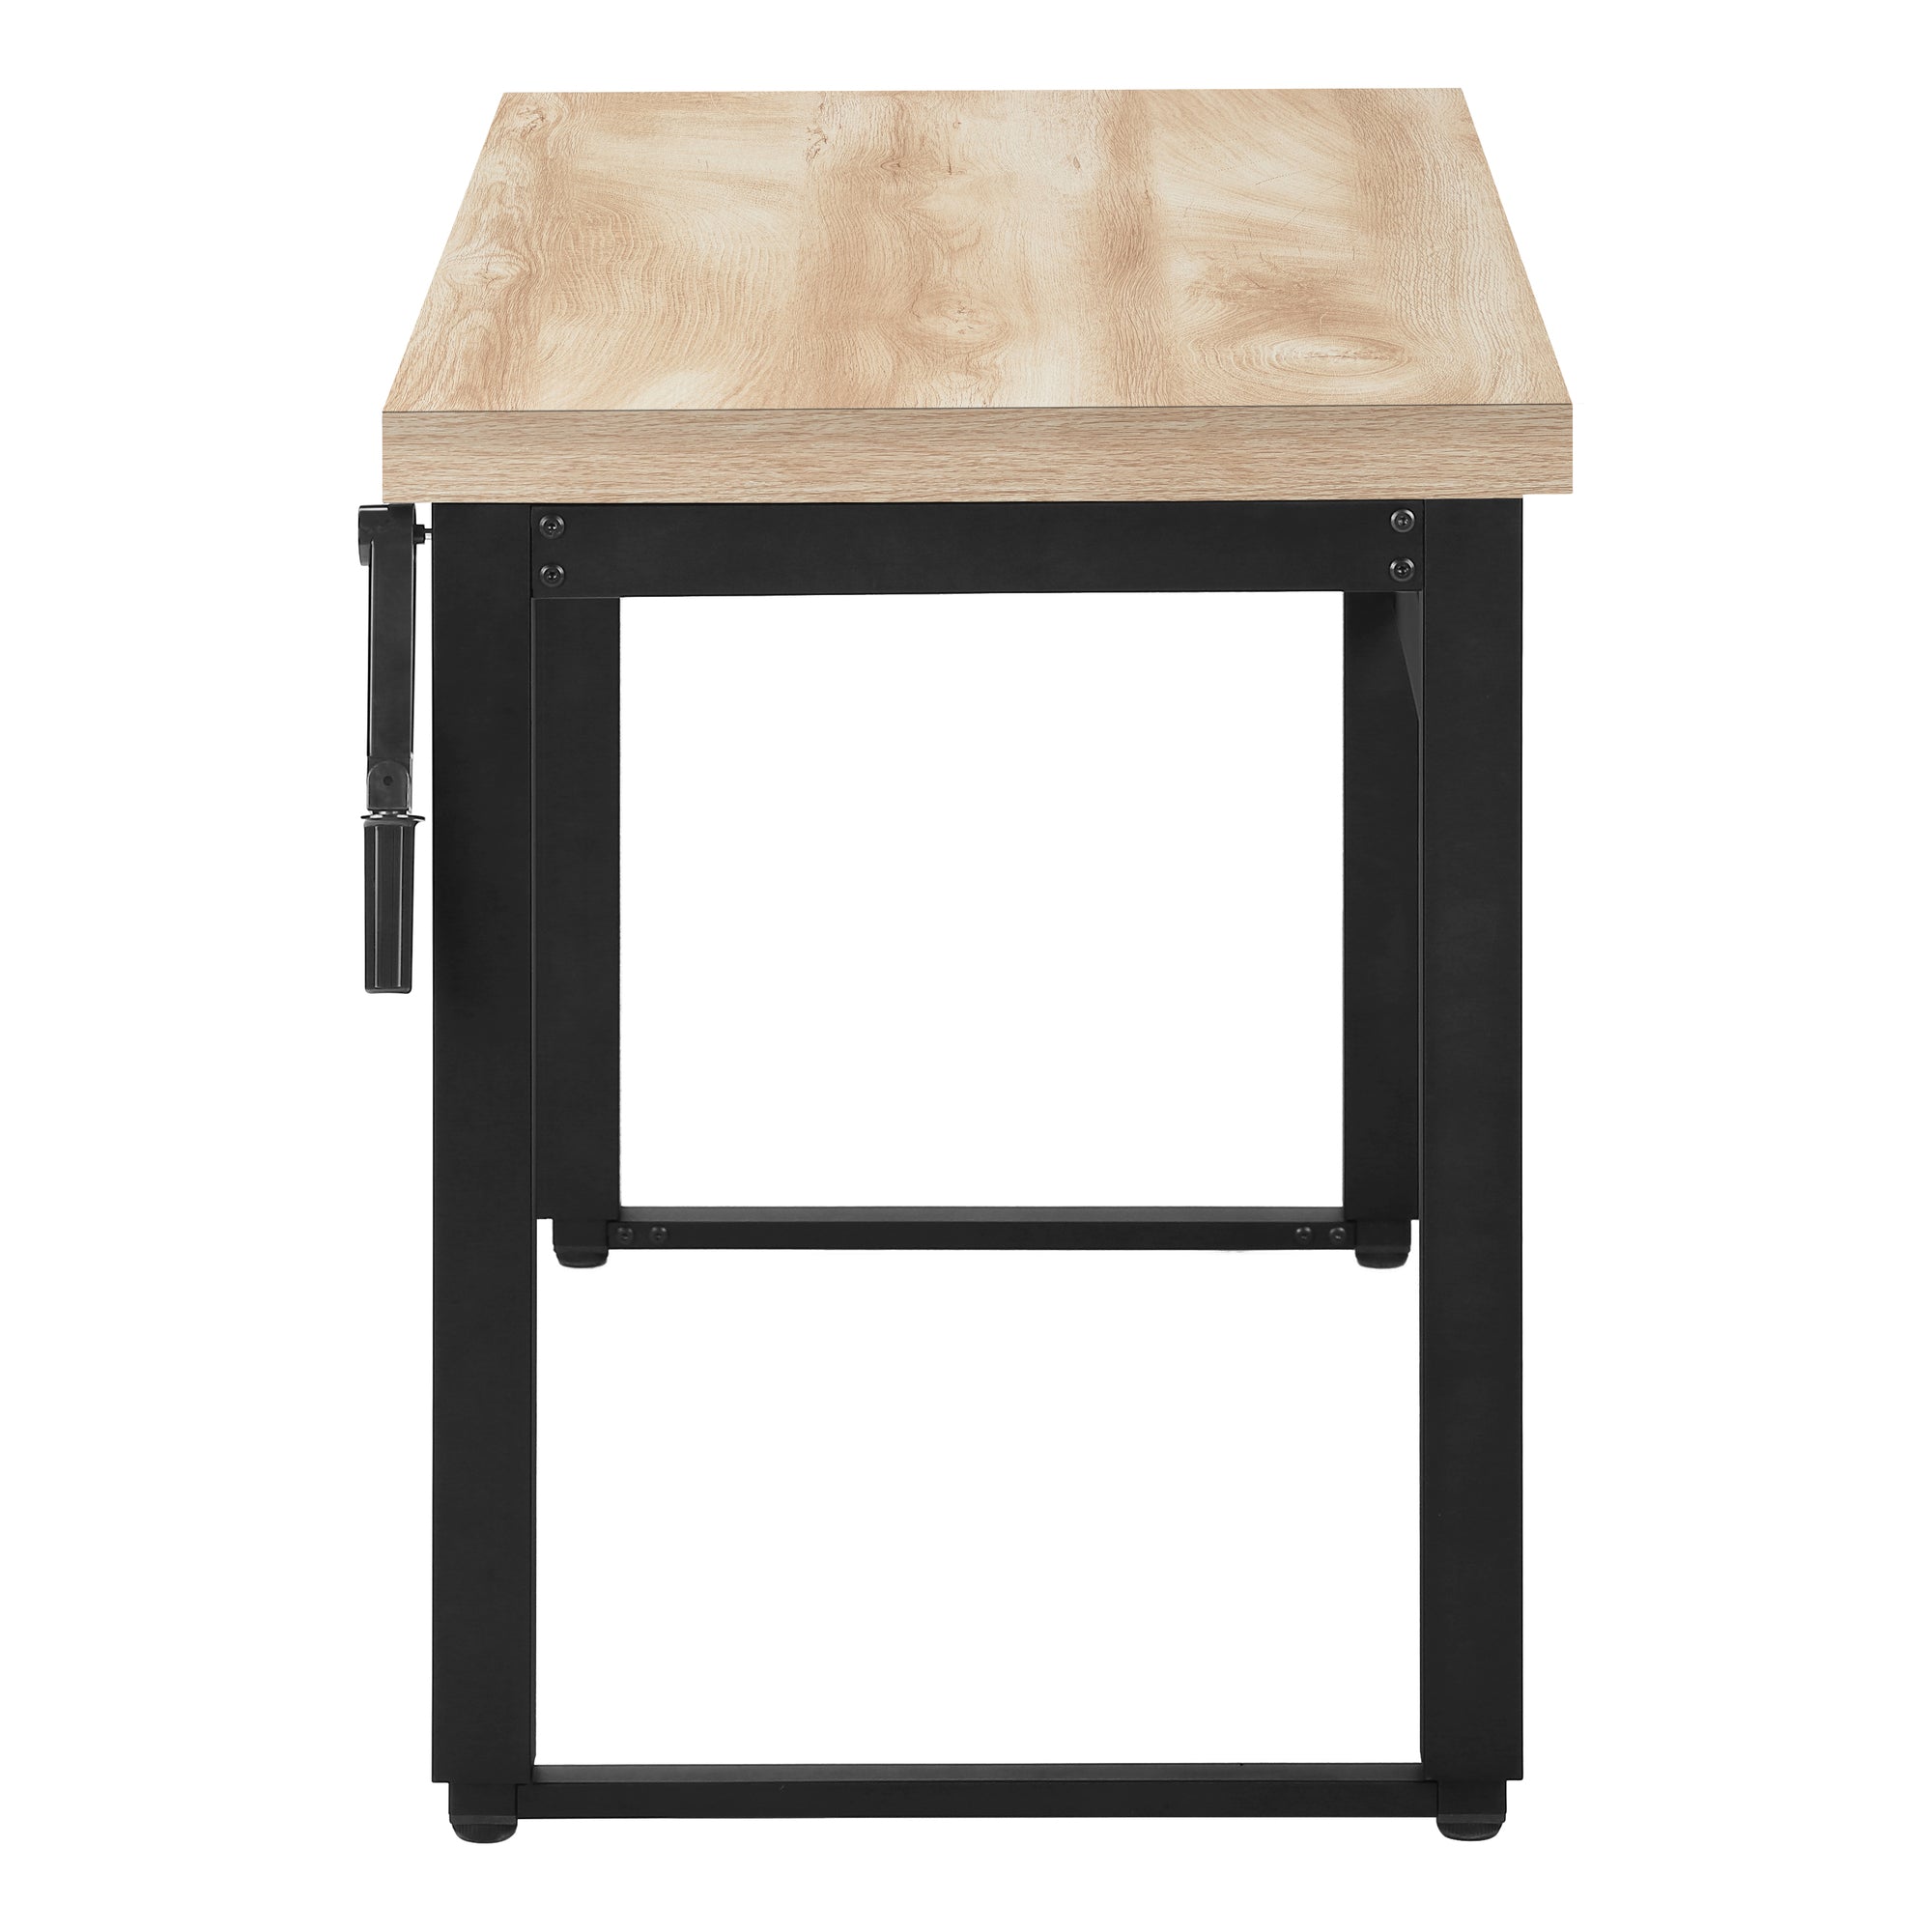 MN-727678    Computer Desk, Home Office, Standing, Adjustable, 48"L, Metal Legs, Laminate, Natural, Contemporary, Modern